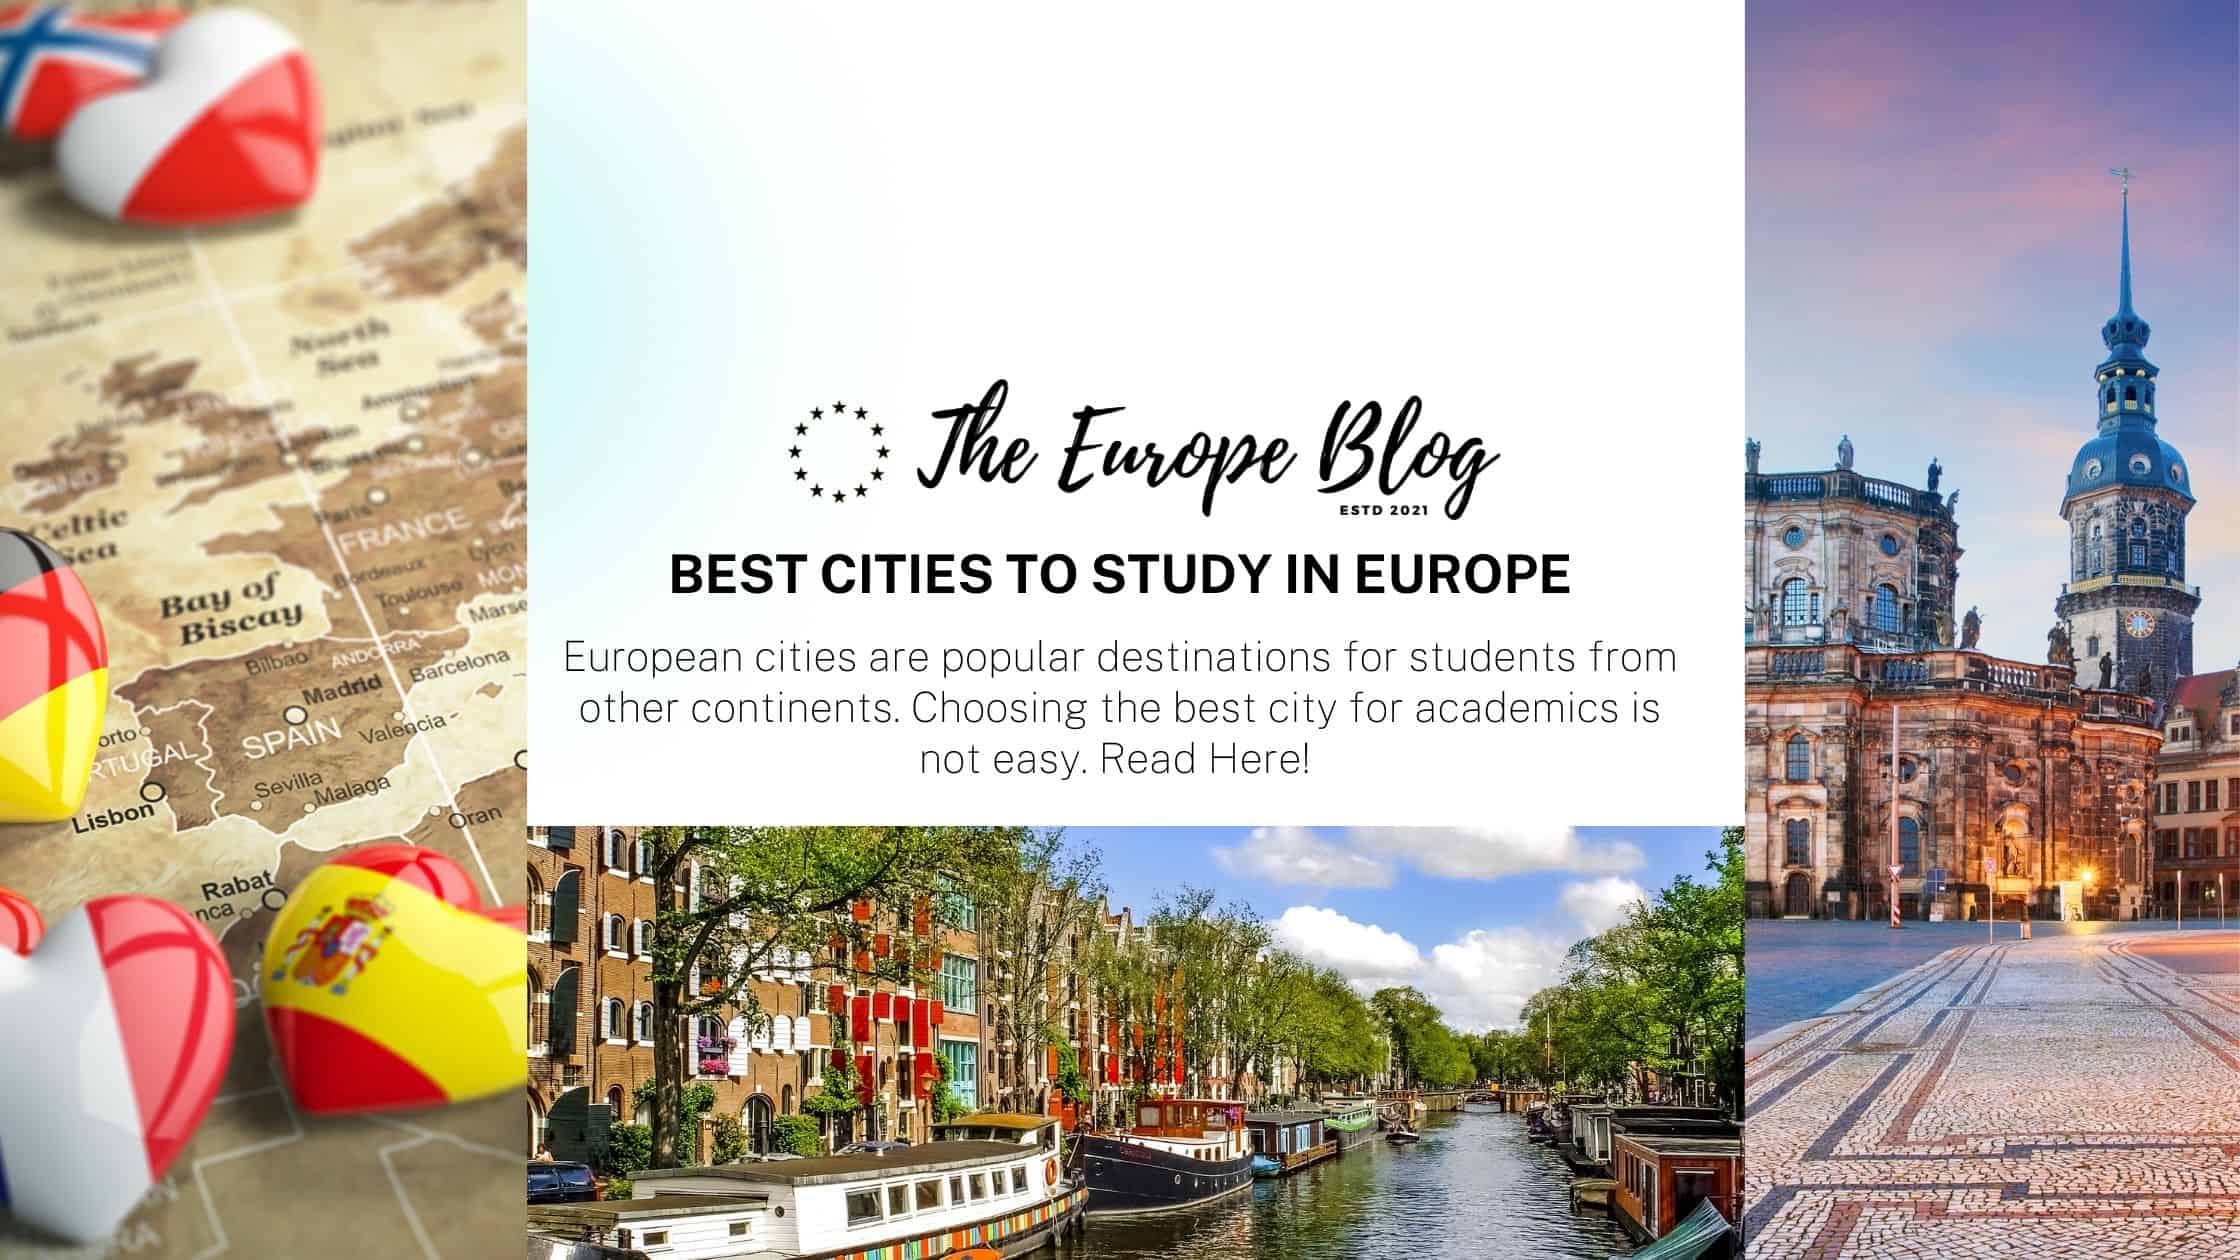 Best cities to study in Europe